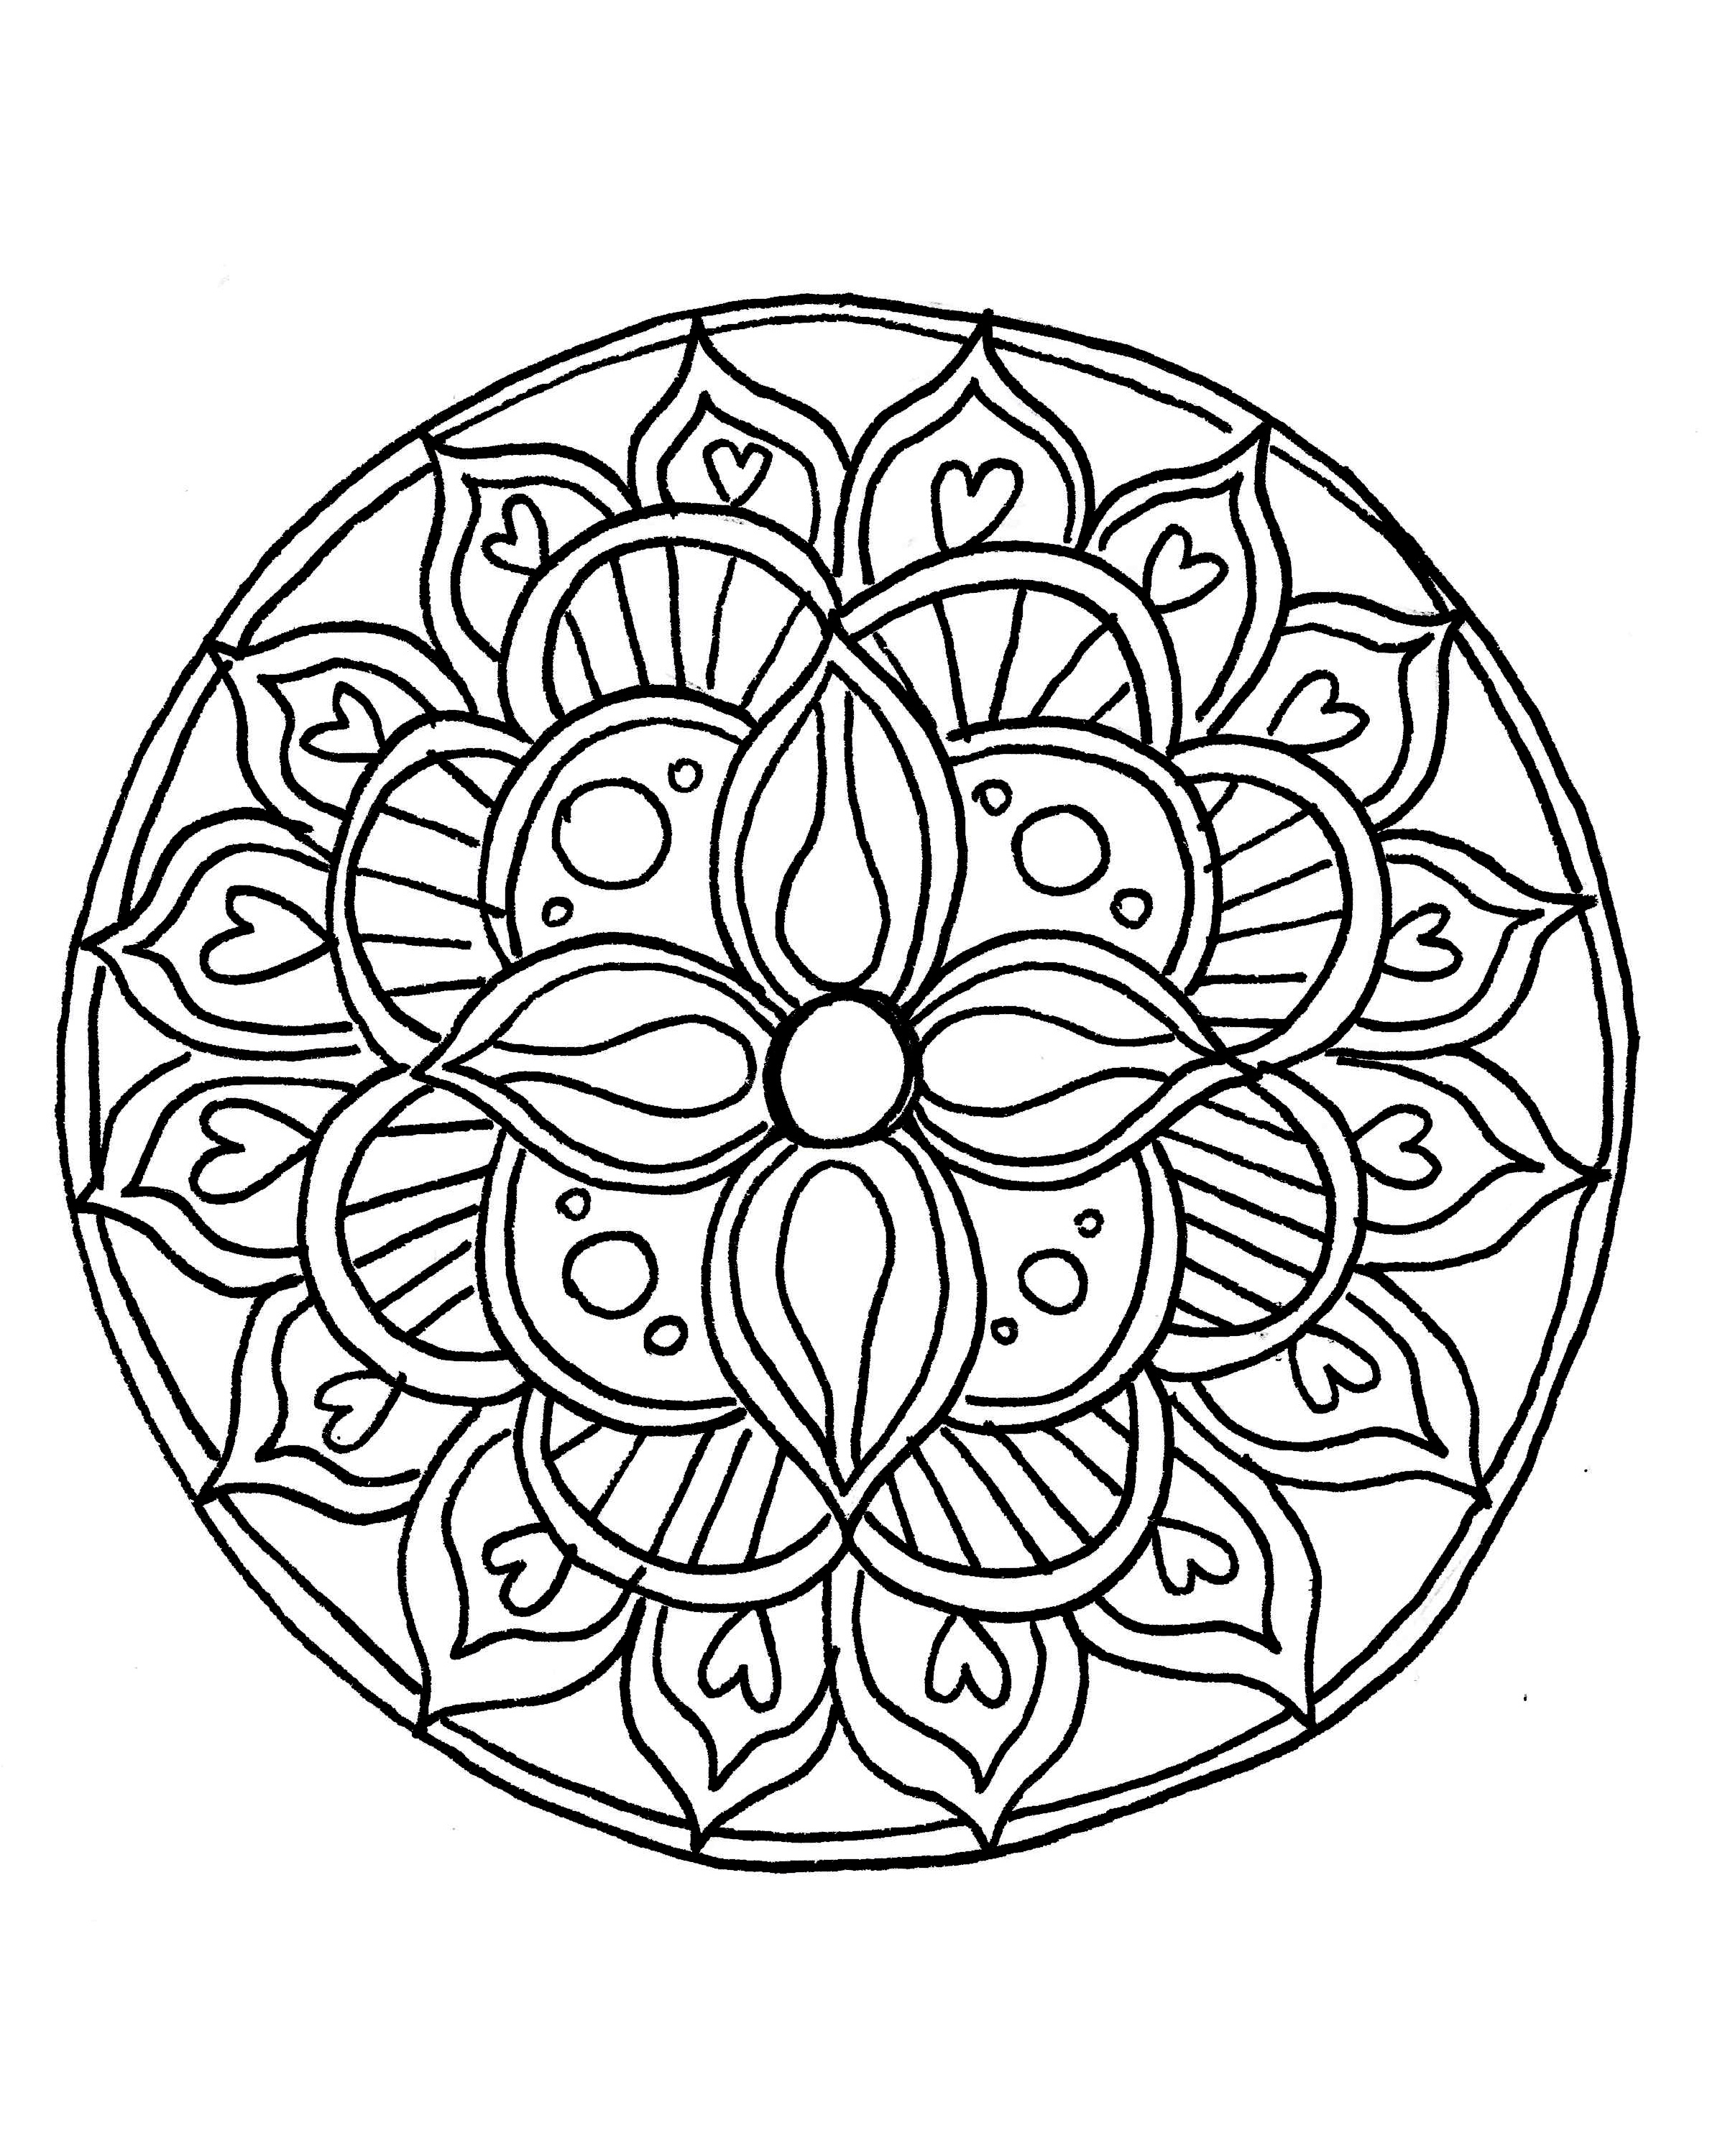 Mandala Kawaii Bestof Galerie How to Draw A Mandala with Free Coloring Pages